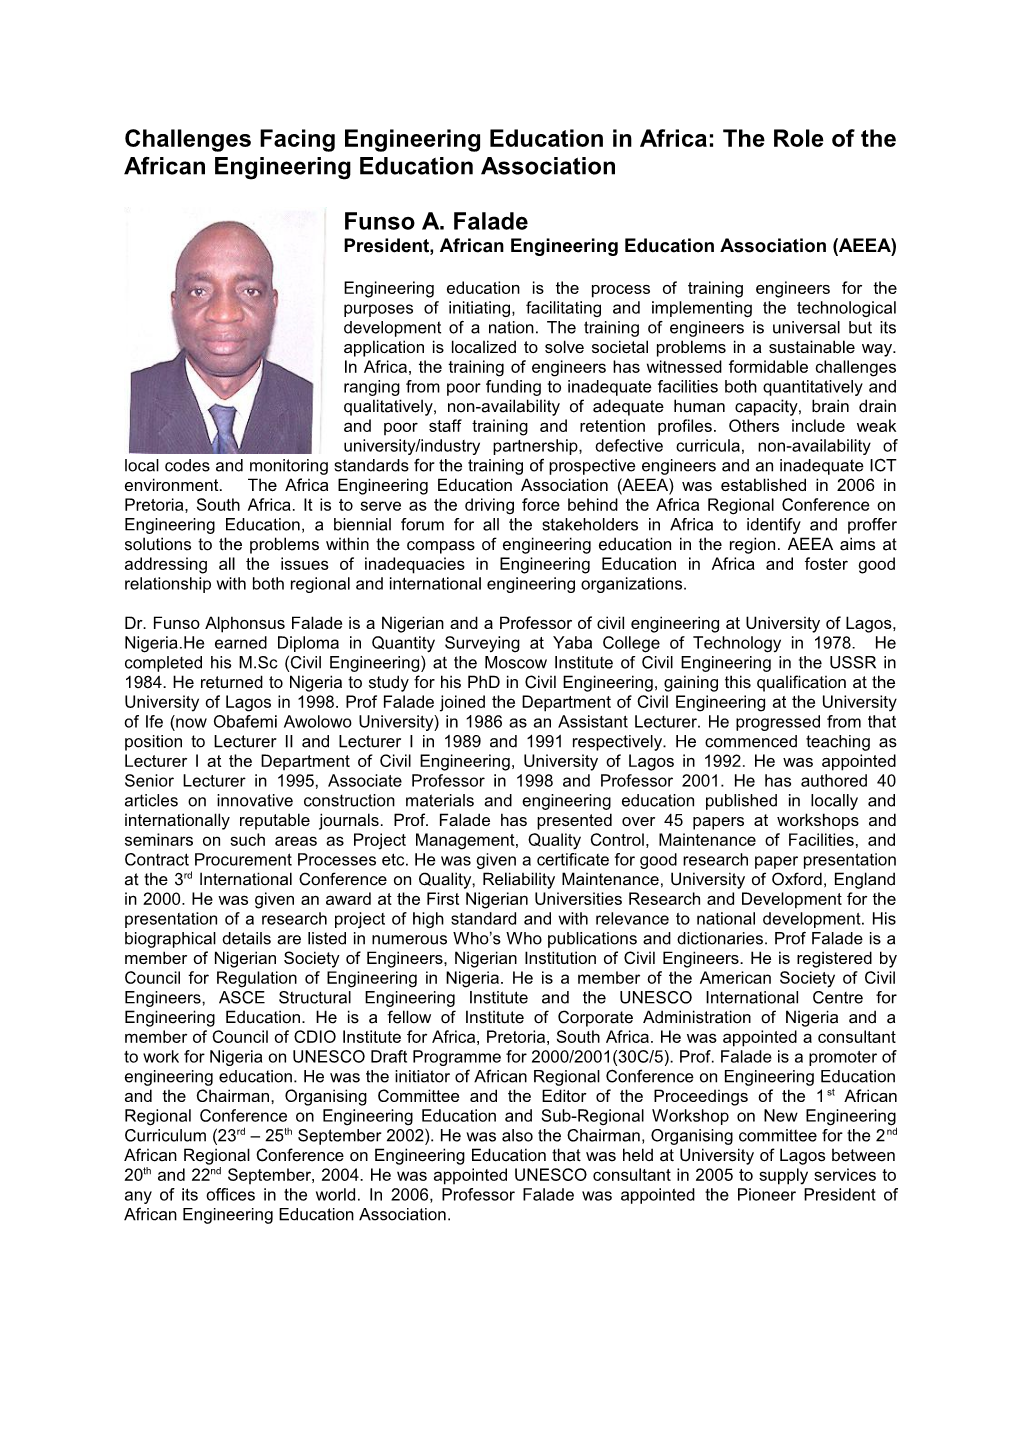 Challenges Facing Engineering Education in Africa: the Role of the African Engineering